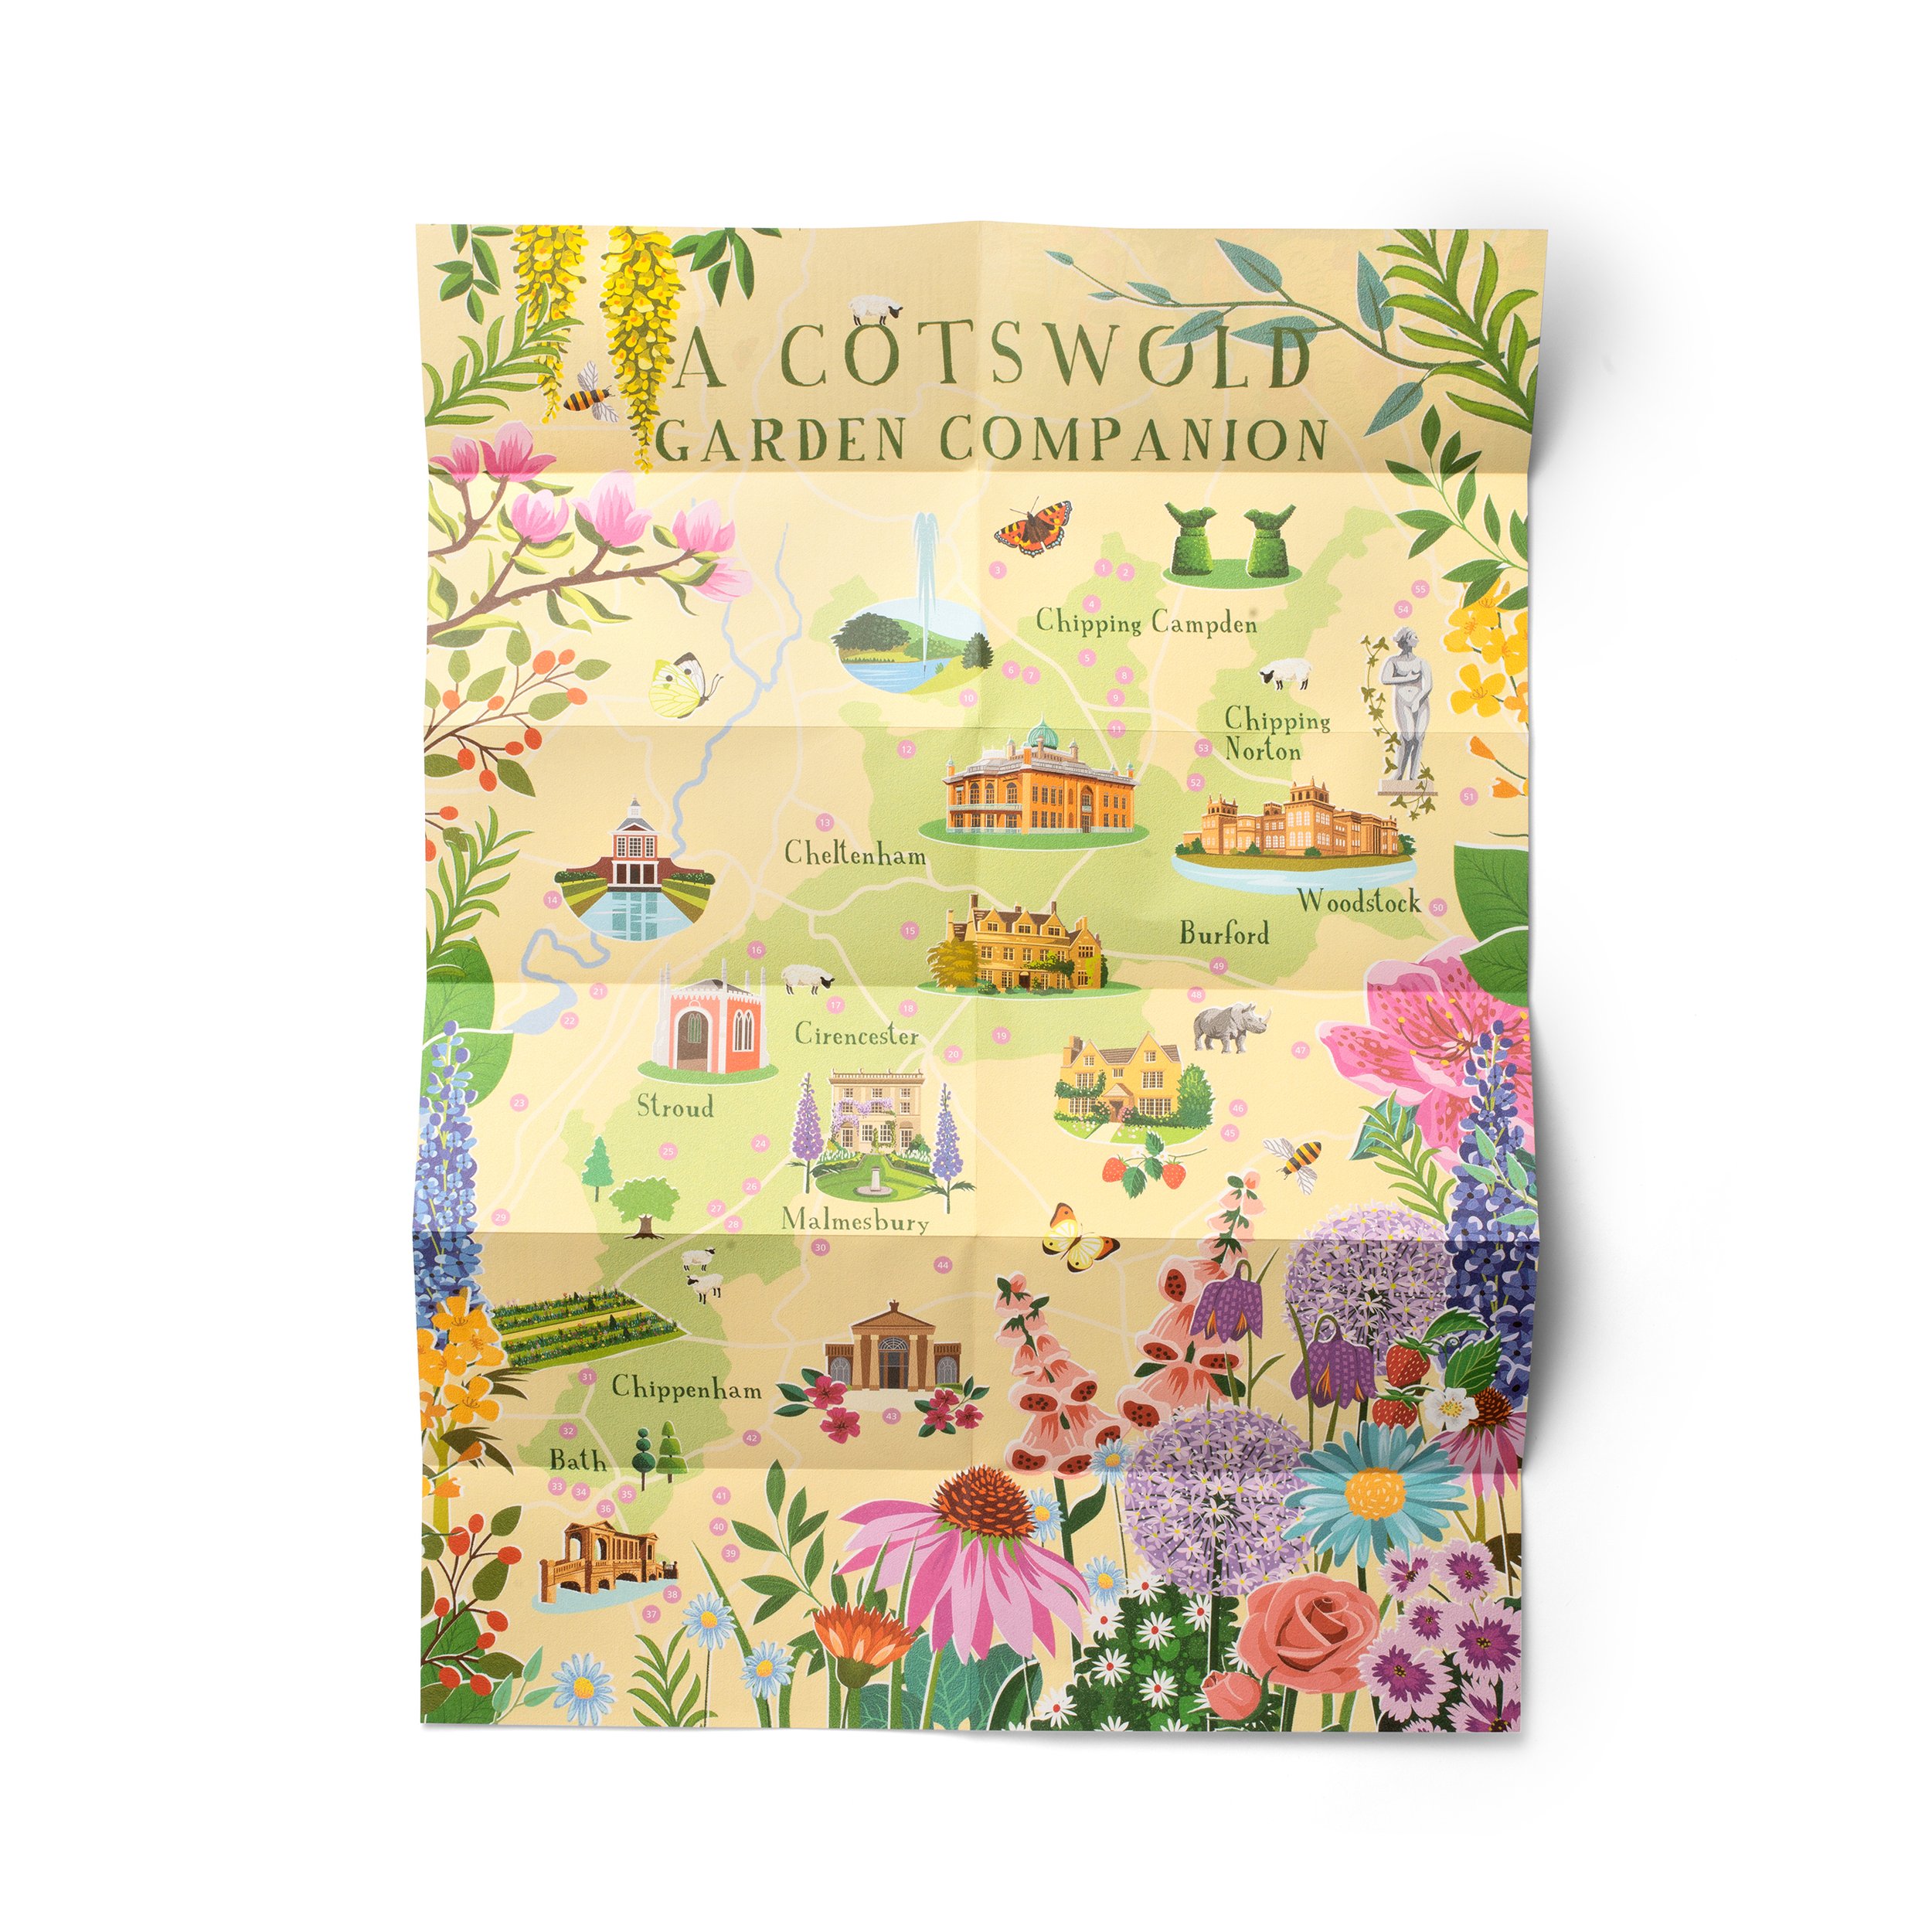 A Cotswold Garden Companion - unfolded map